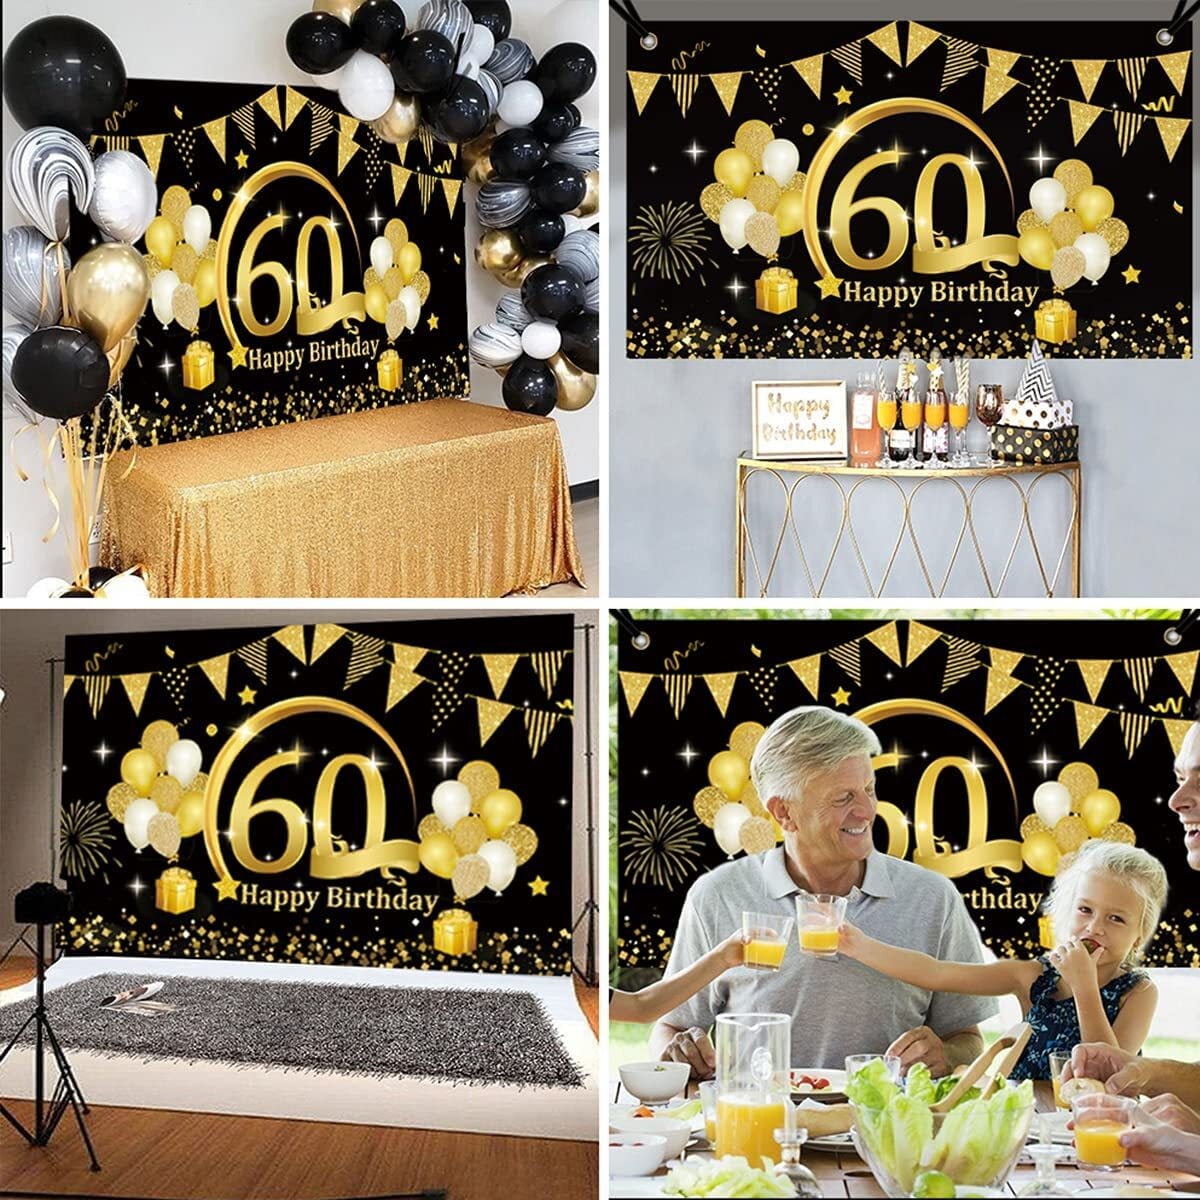 Happy 60th Birthday Backdrop Large Fabric Black Gold 60th Anniversary Birthday Sign Banner Photo Booth Photography Background with Rope for Men Women 60th Birthday Party Decorations, 72.8 x 43.3 Inch - Walmart.com